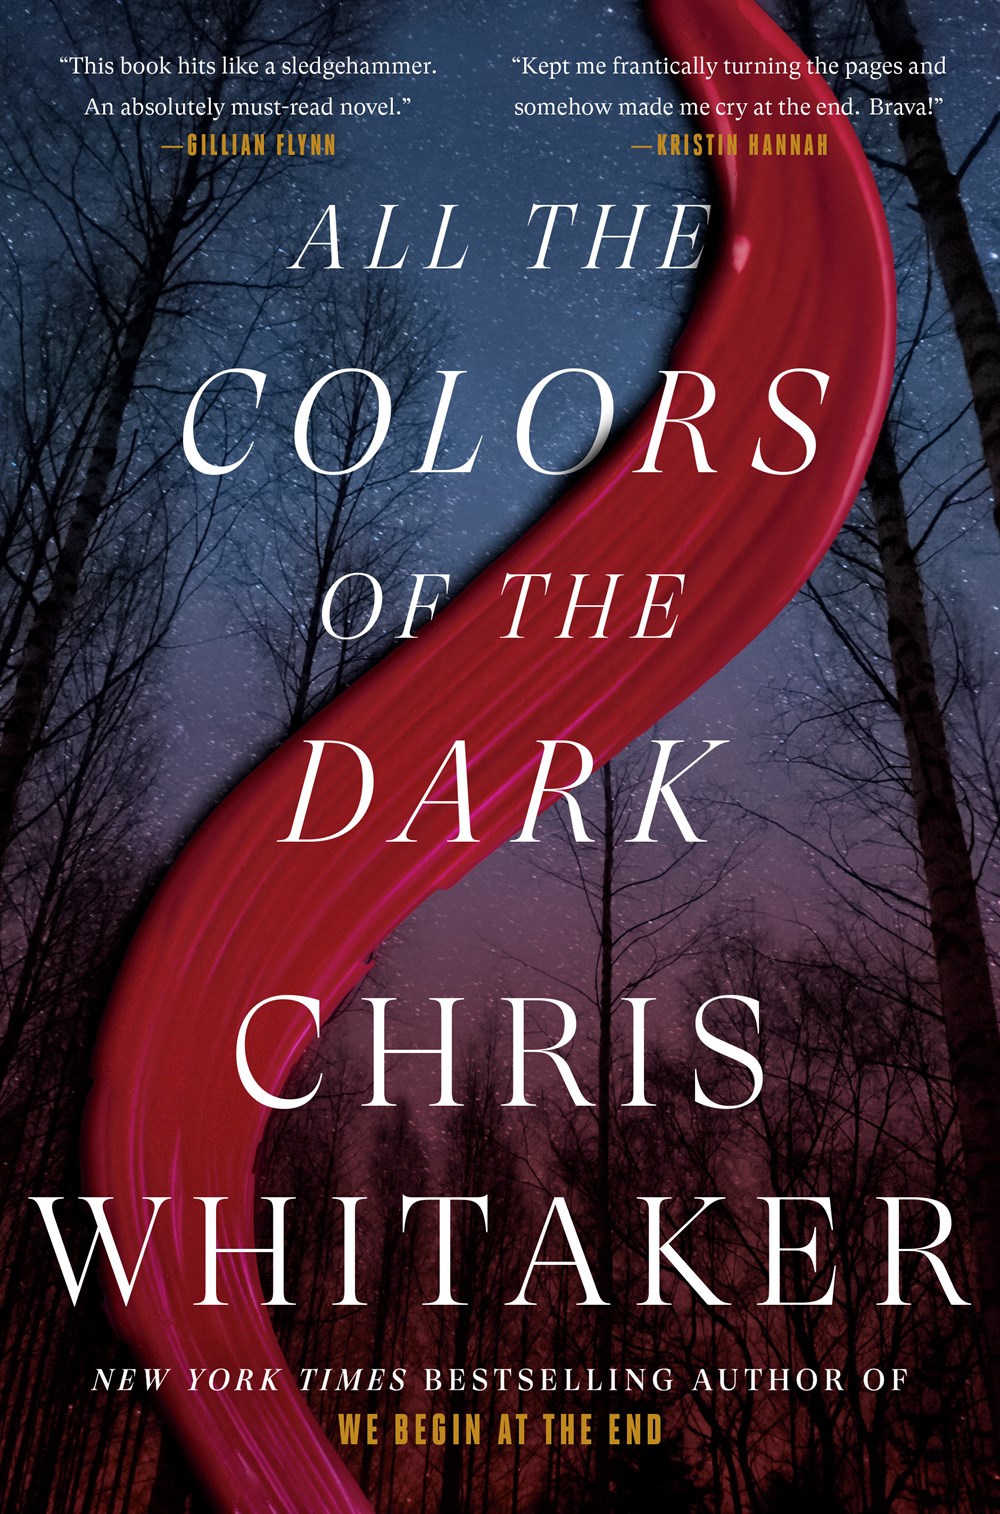 ‘All the Colors of the Dark’ by Chris Whitaker Tops Holds Lists | Book Pulse